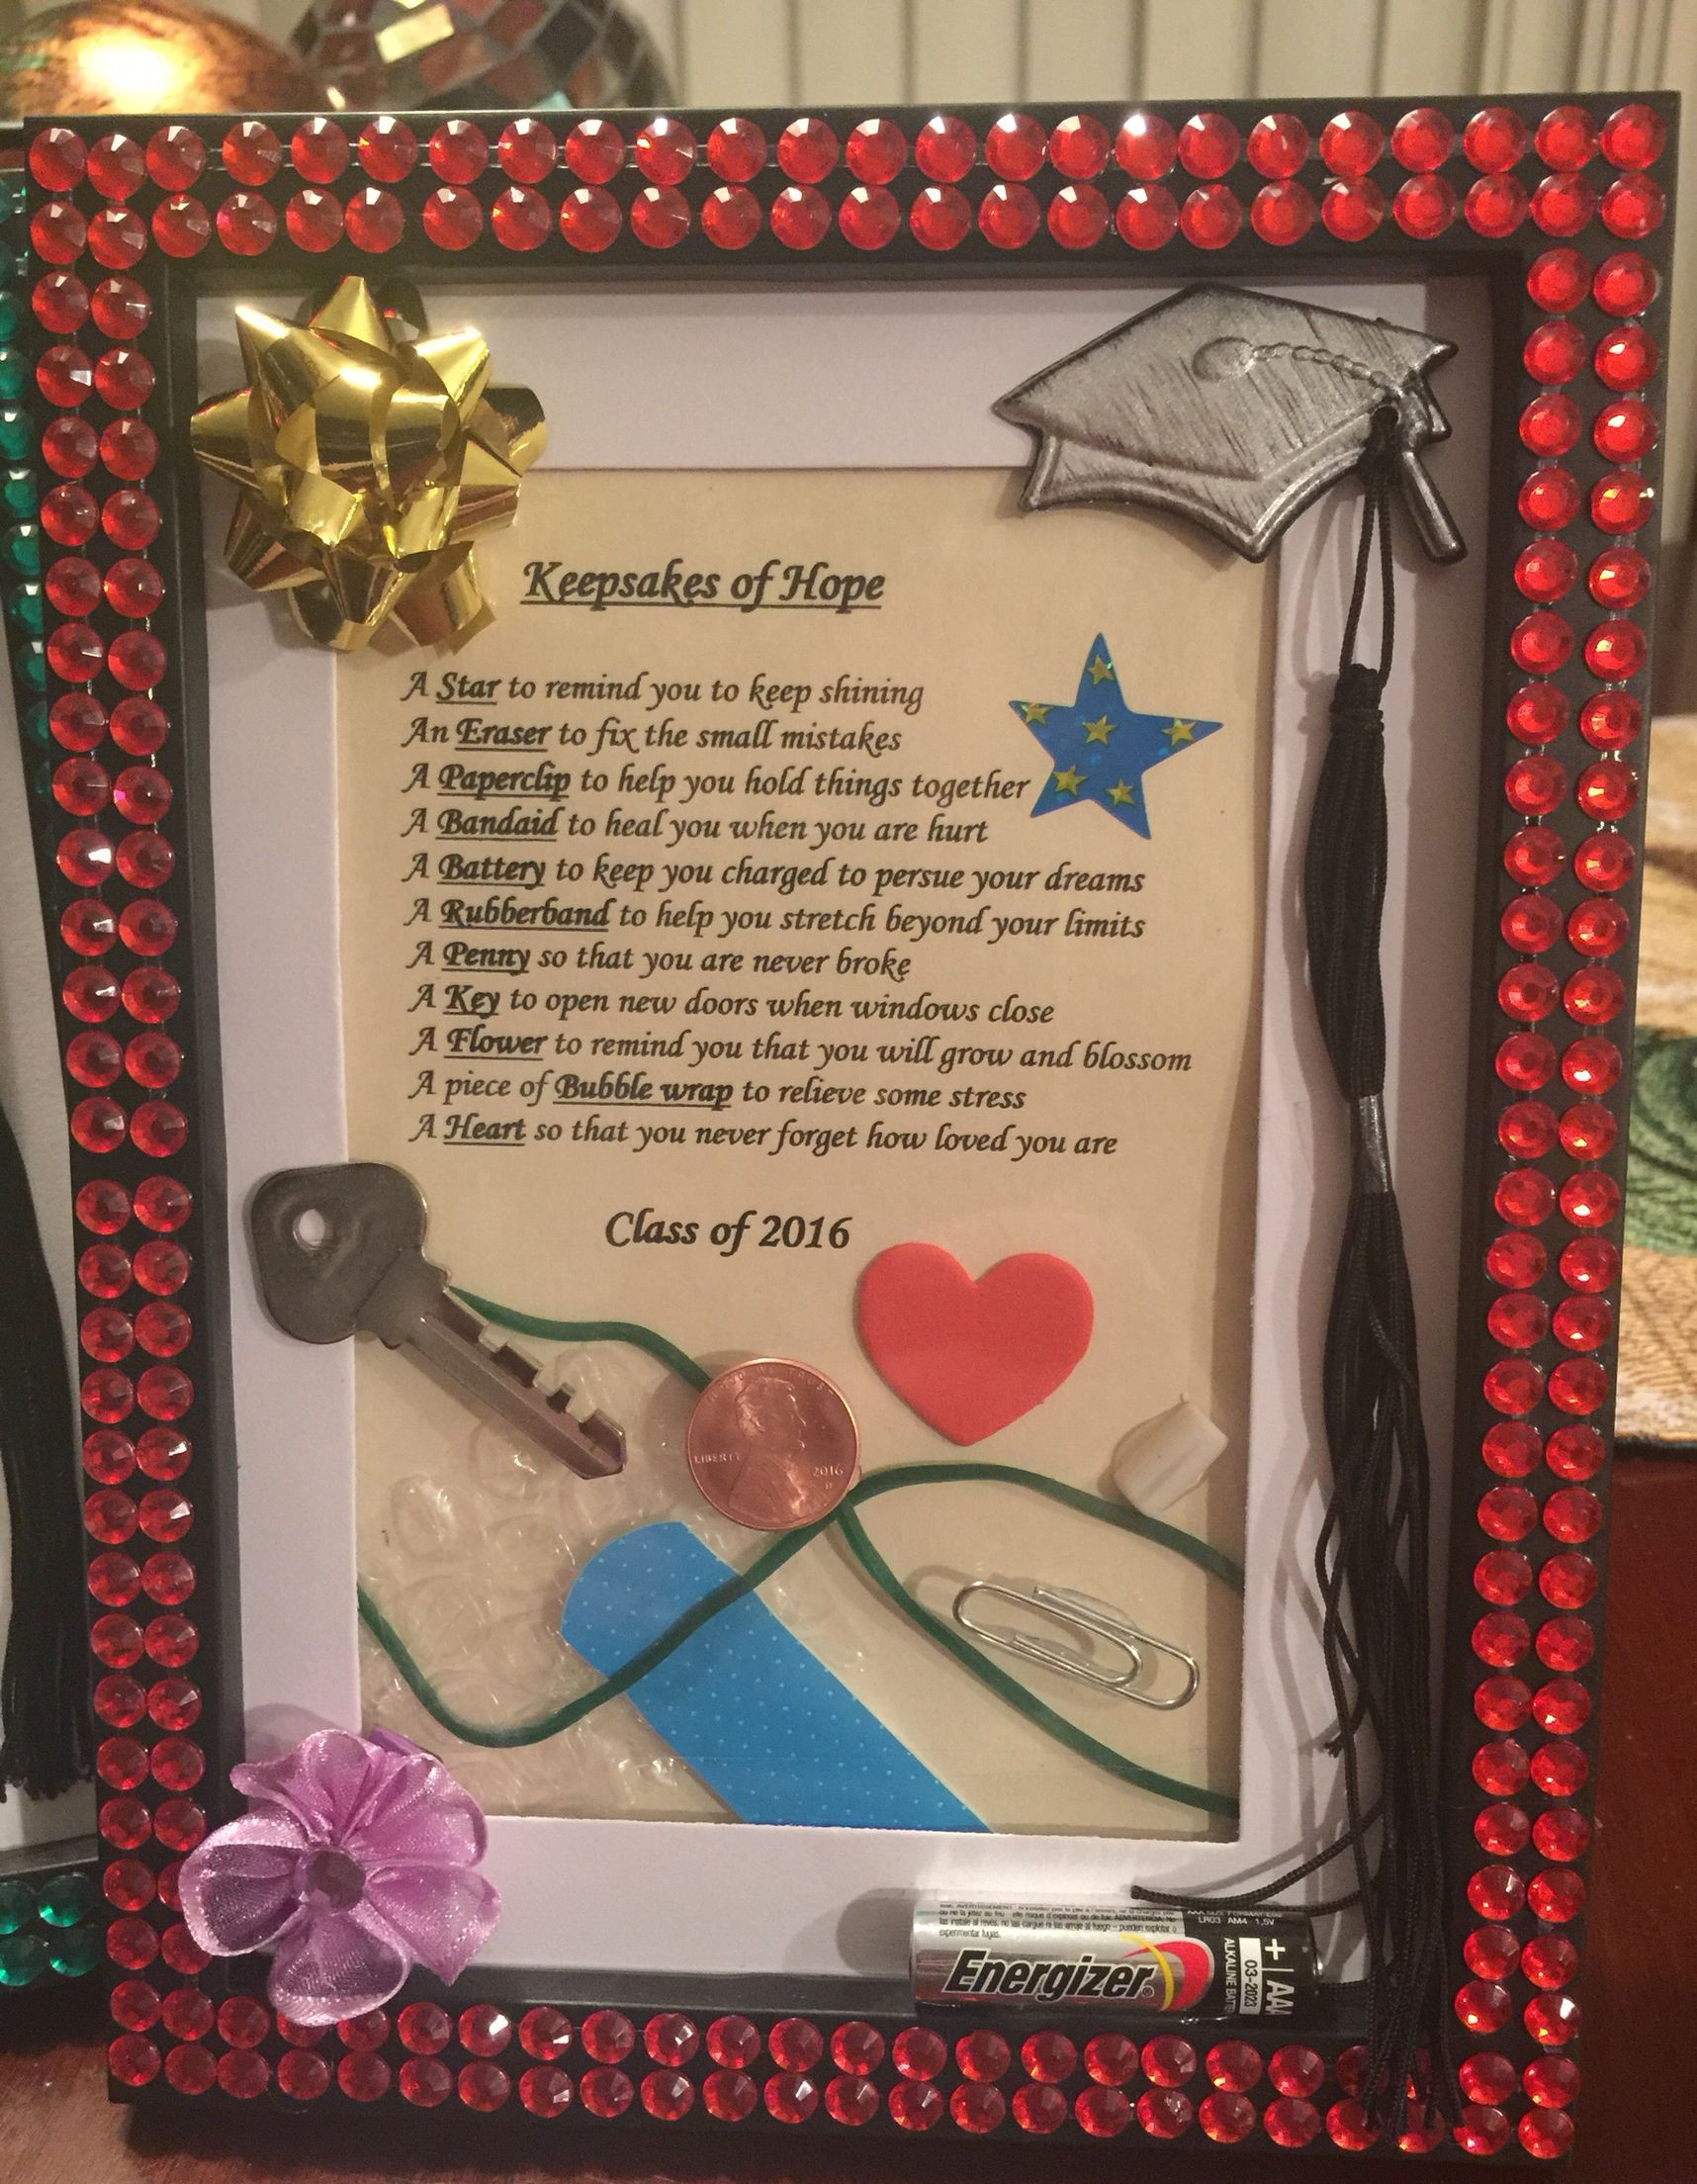 Make Graduation Gift Ideas For Friends
 Graduation Gift Keepsakes of hope The perfect DIY